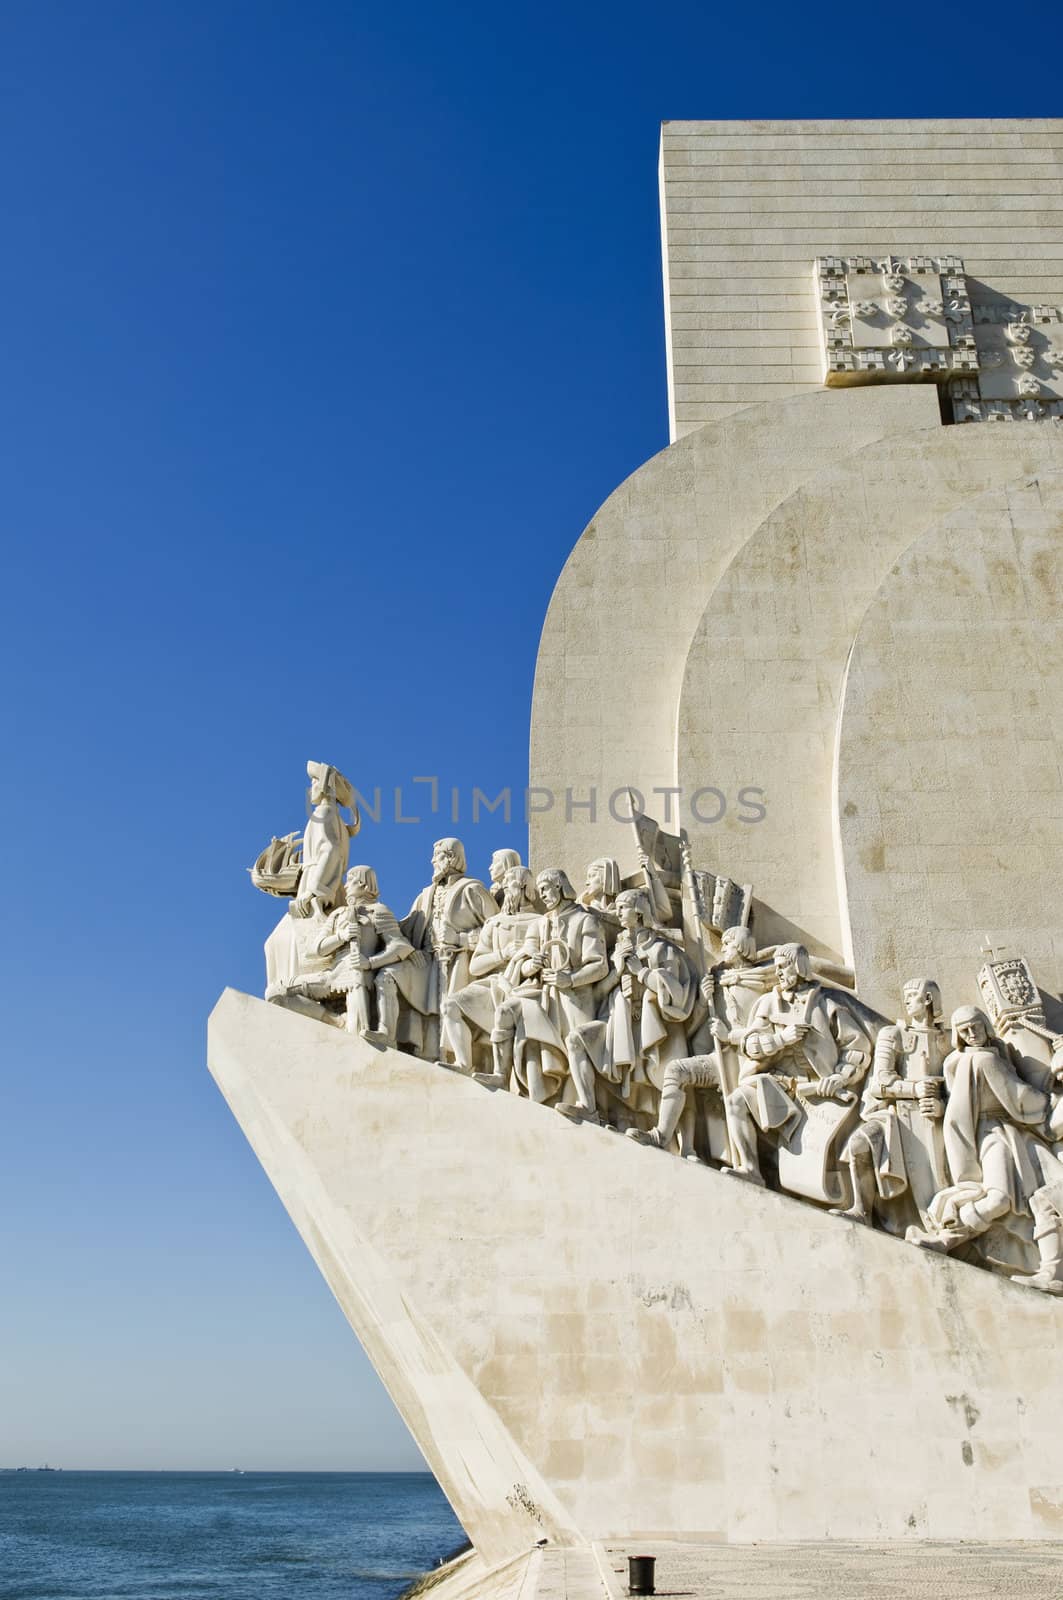 Padrao dos Descobrimentos (Monument to the Discoveries) in the bank of Tagus river, Lisbon, Portugal